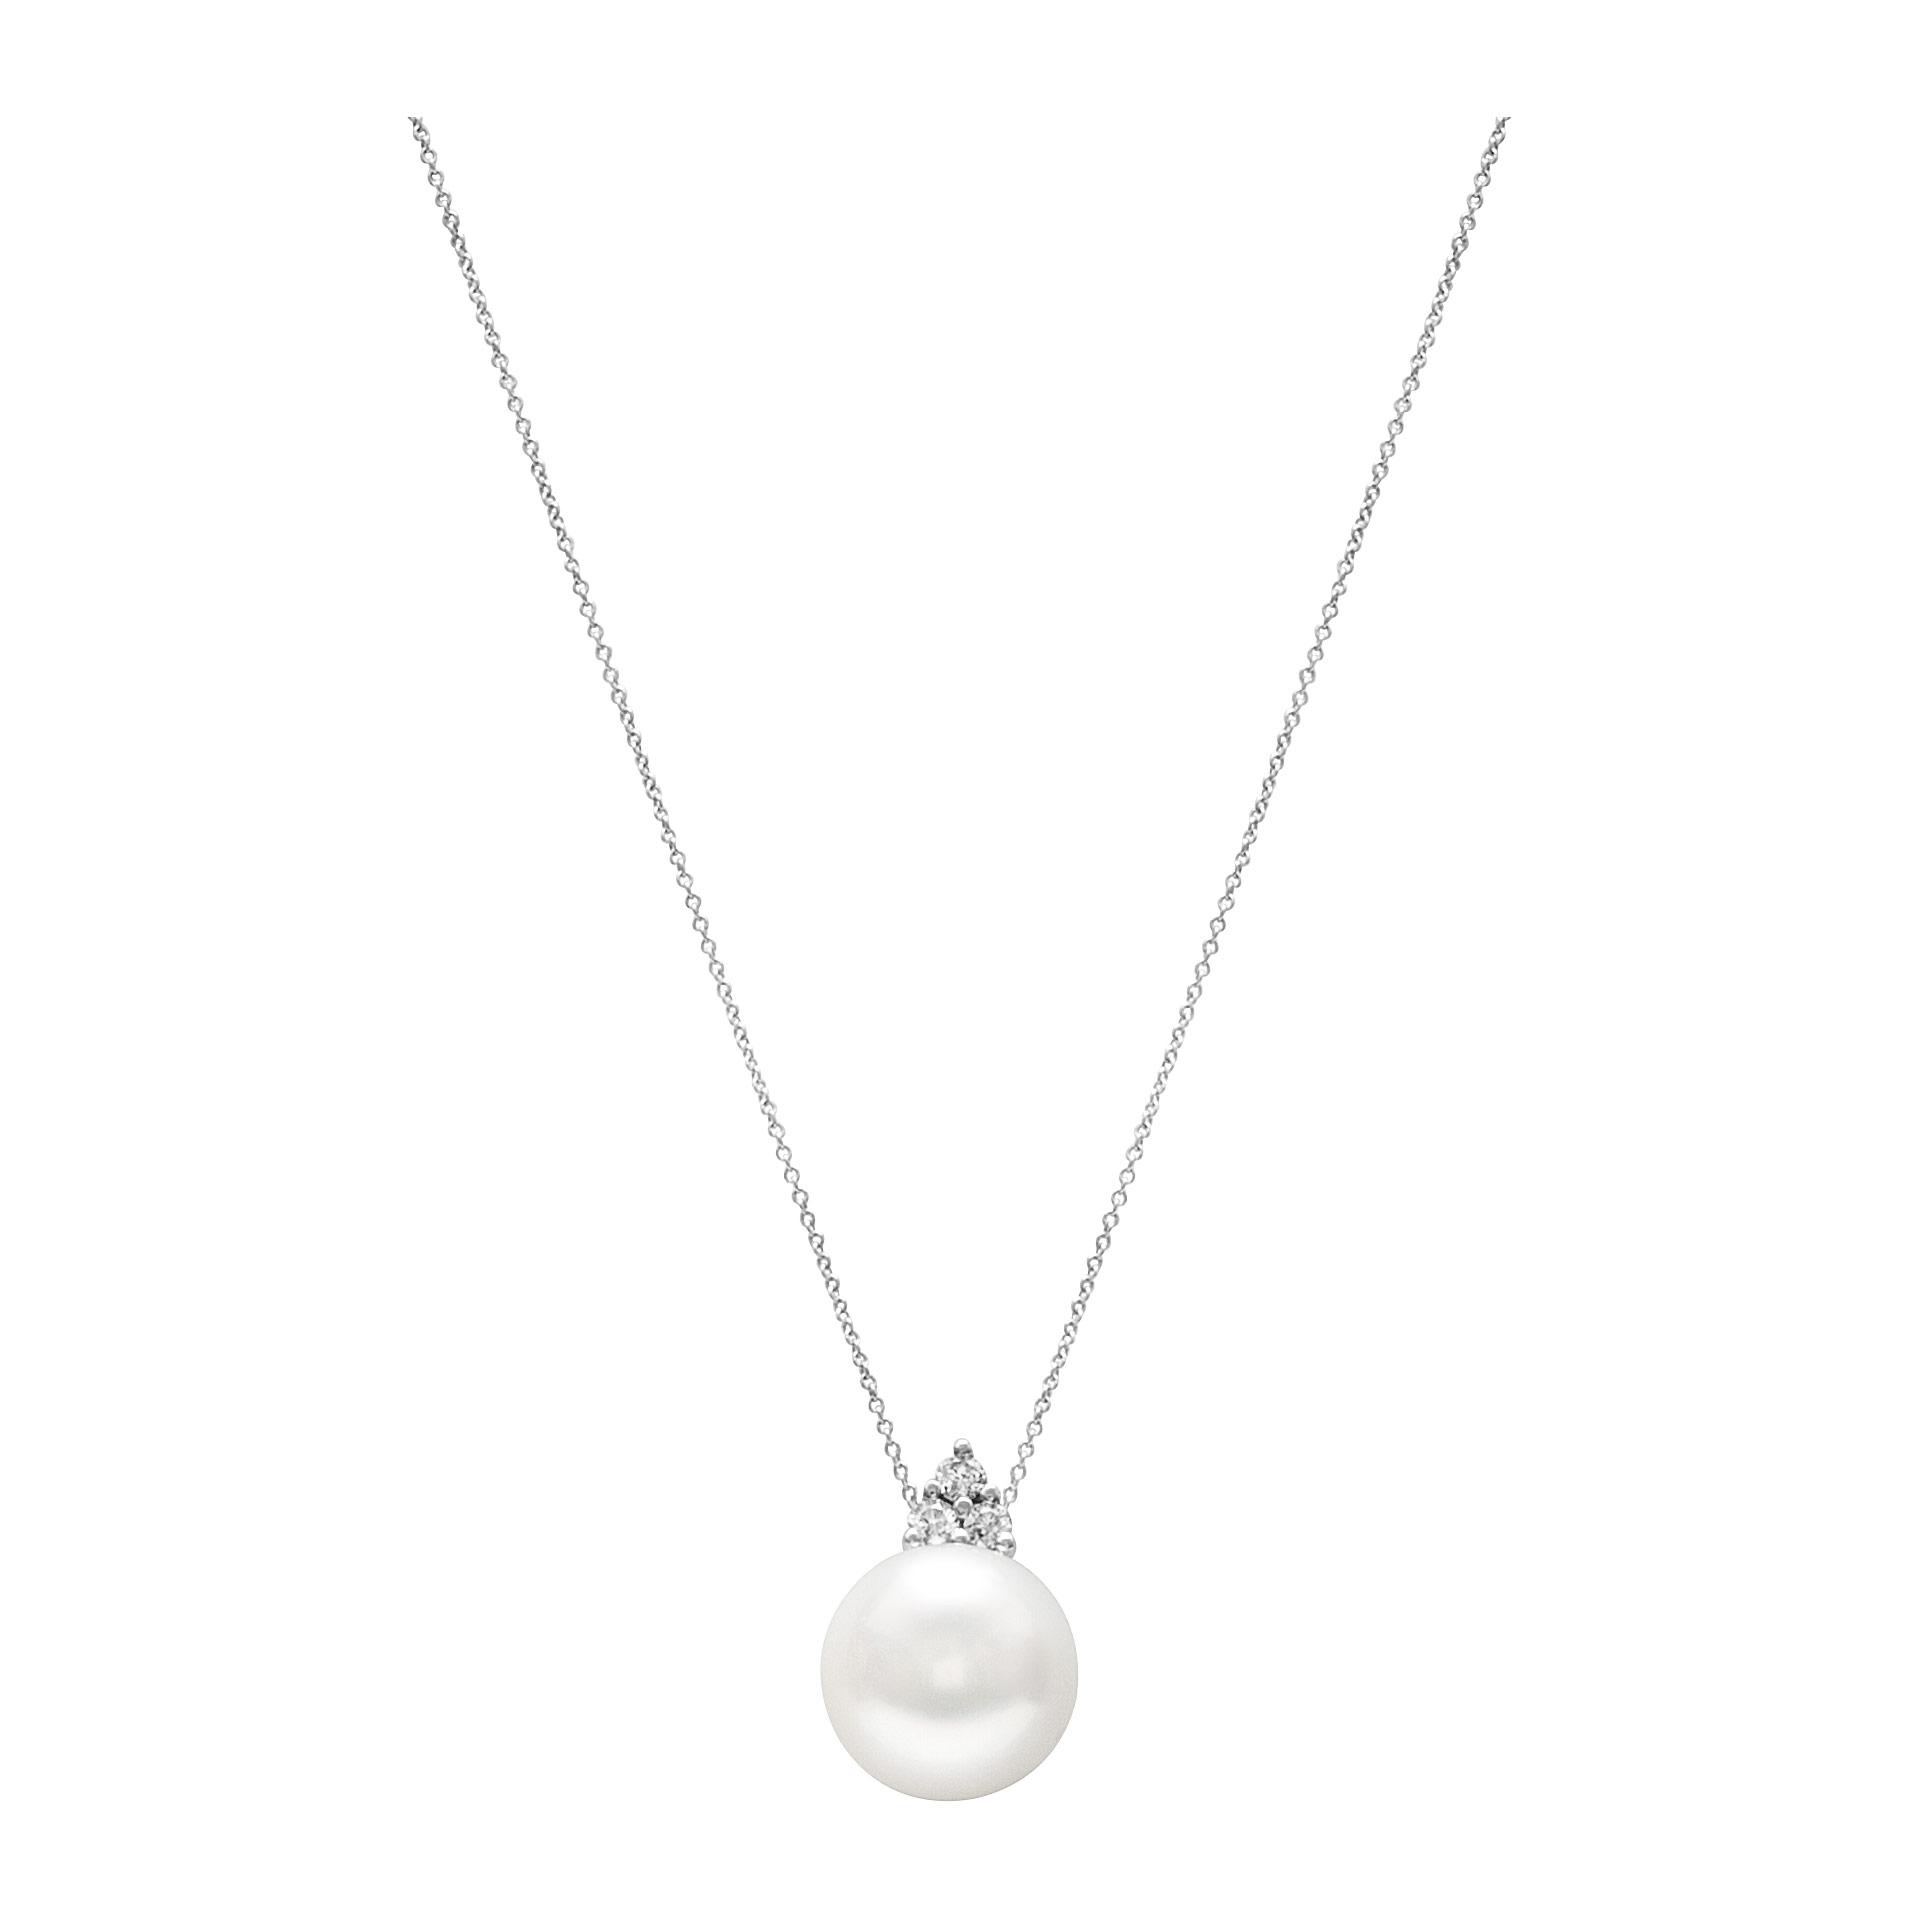 South Sea pearl pendant necklace with diamond accents. image 2